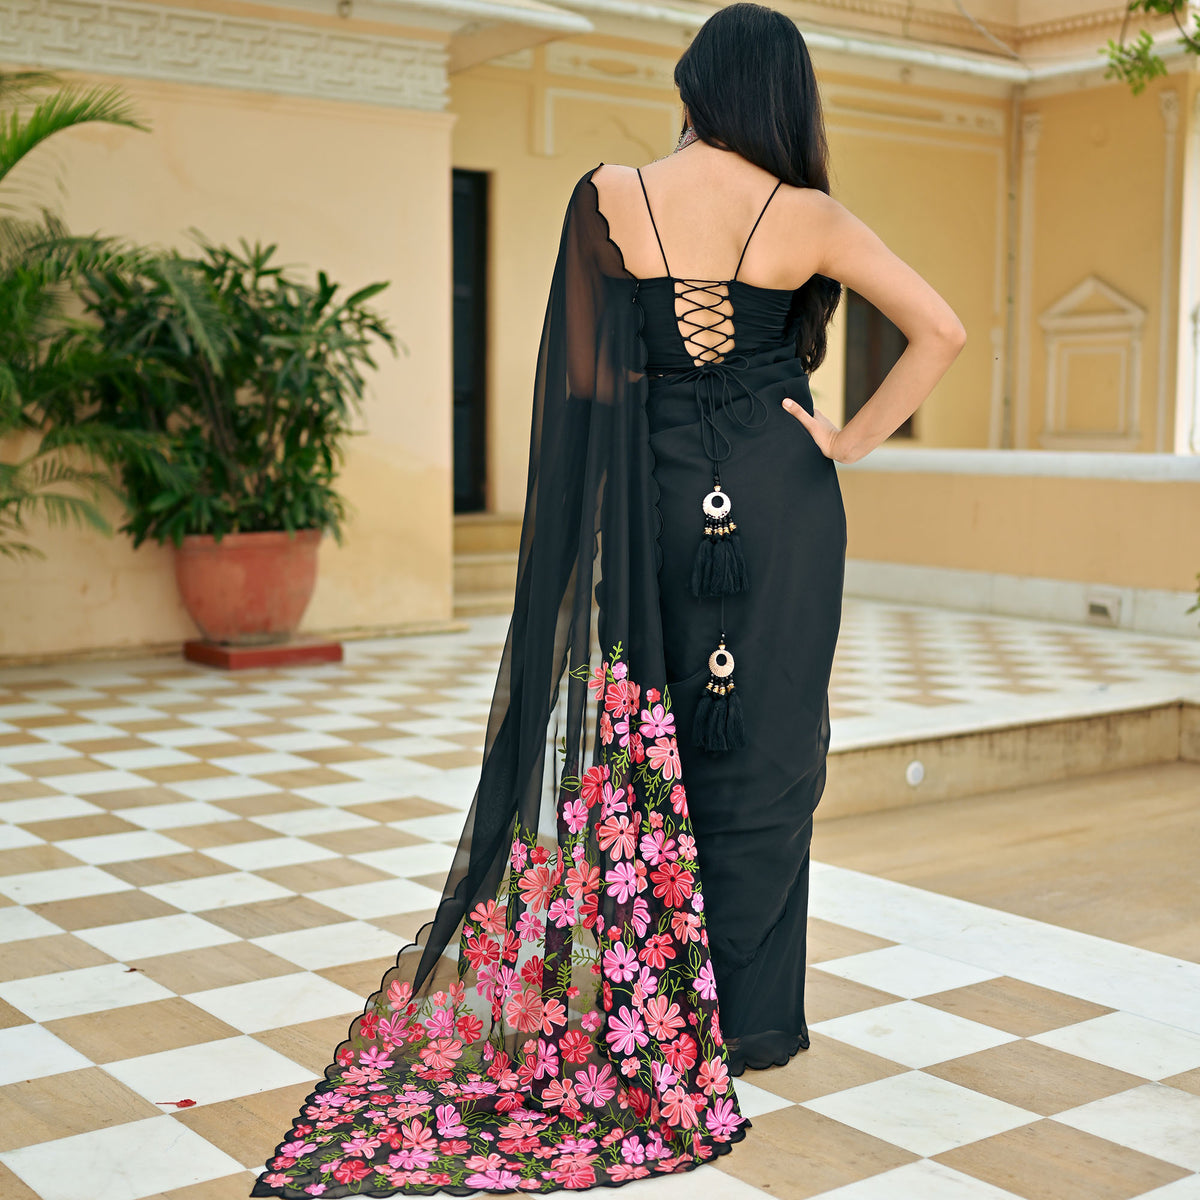 7 Different Old Saree Dress Design That You Need TO Try